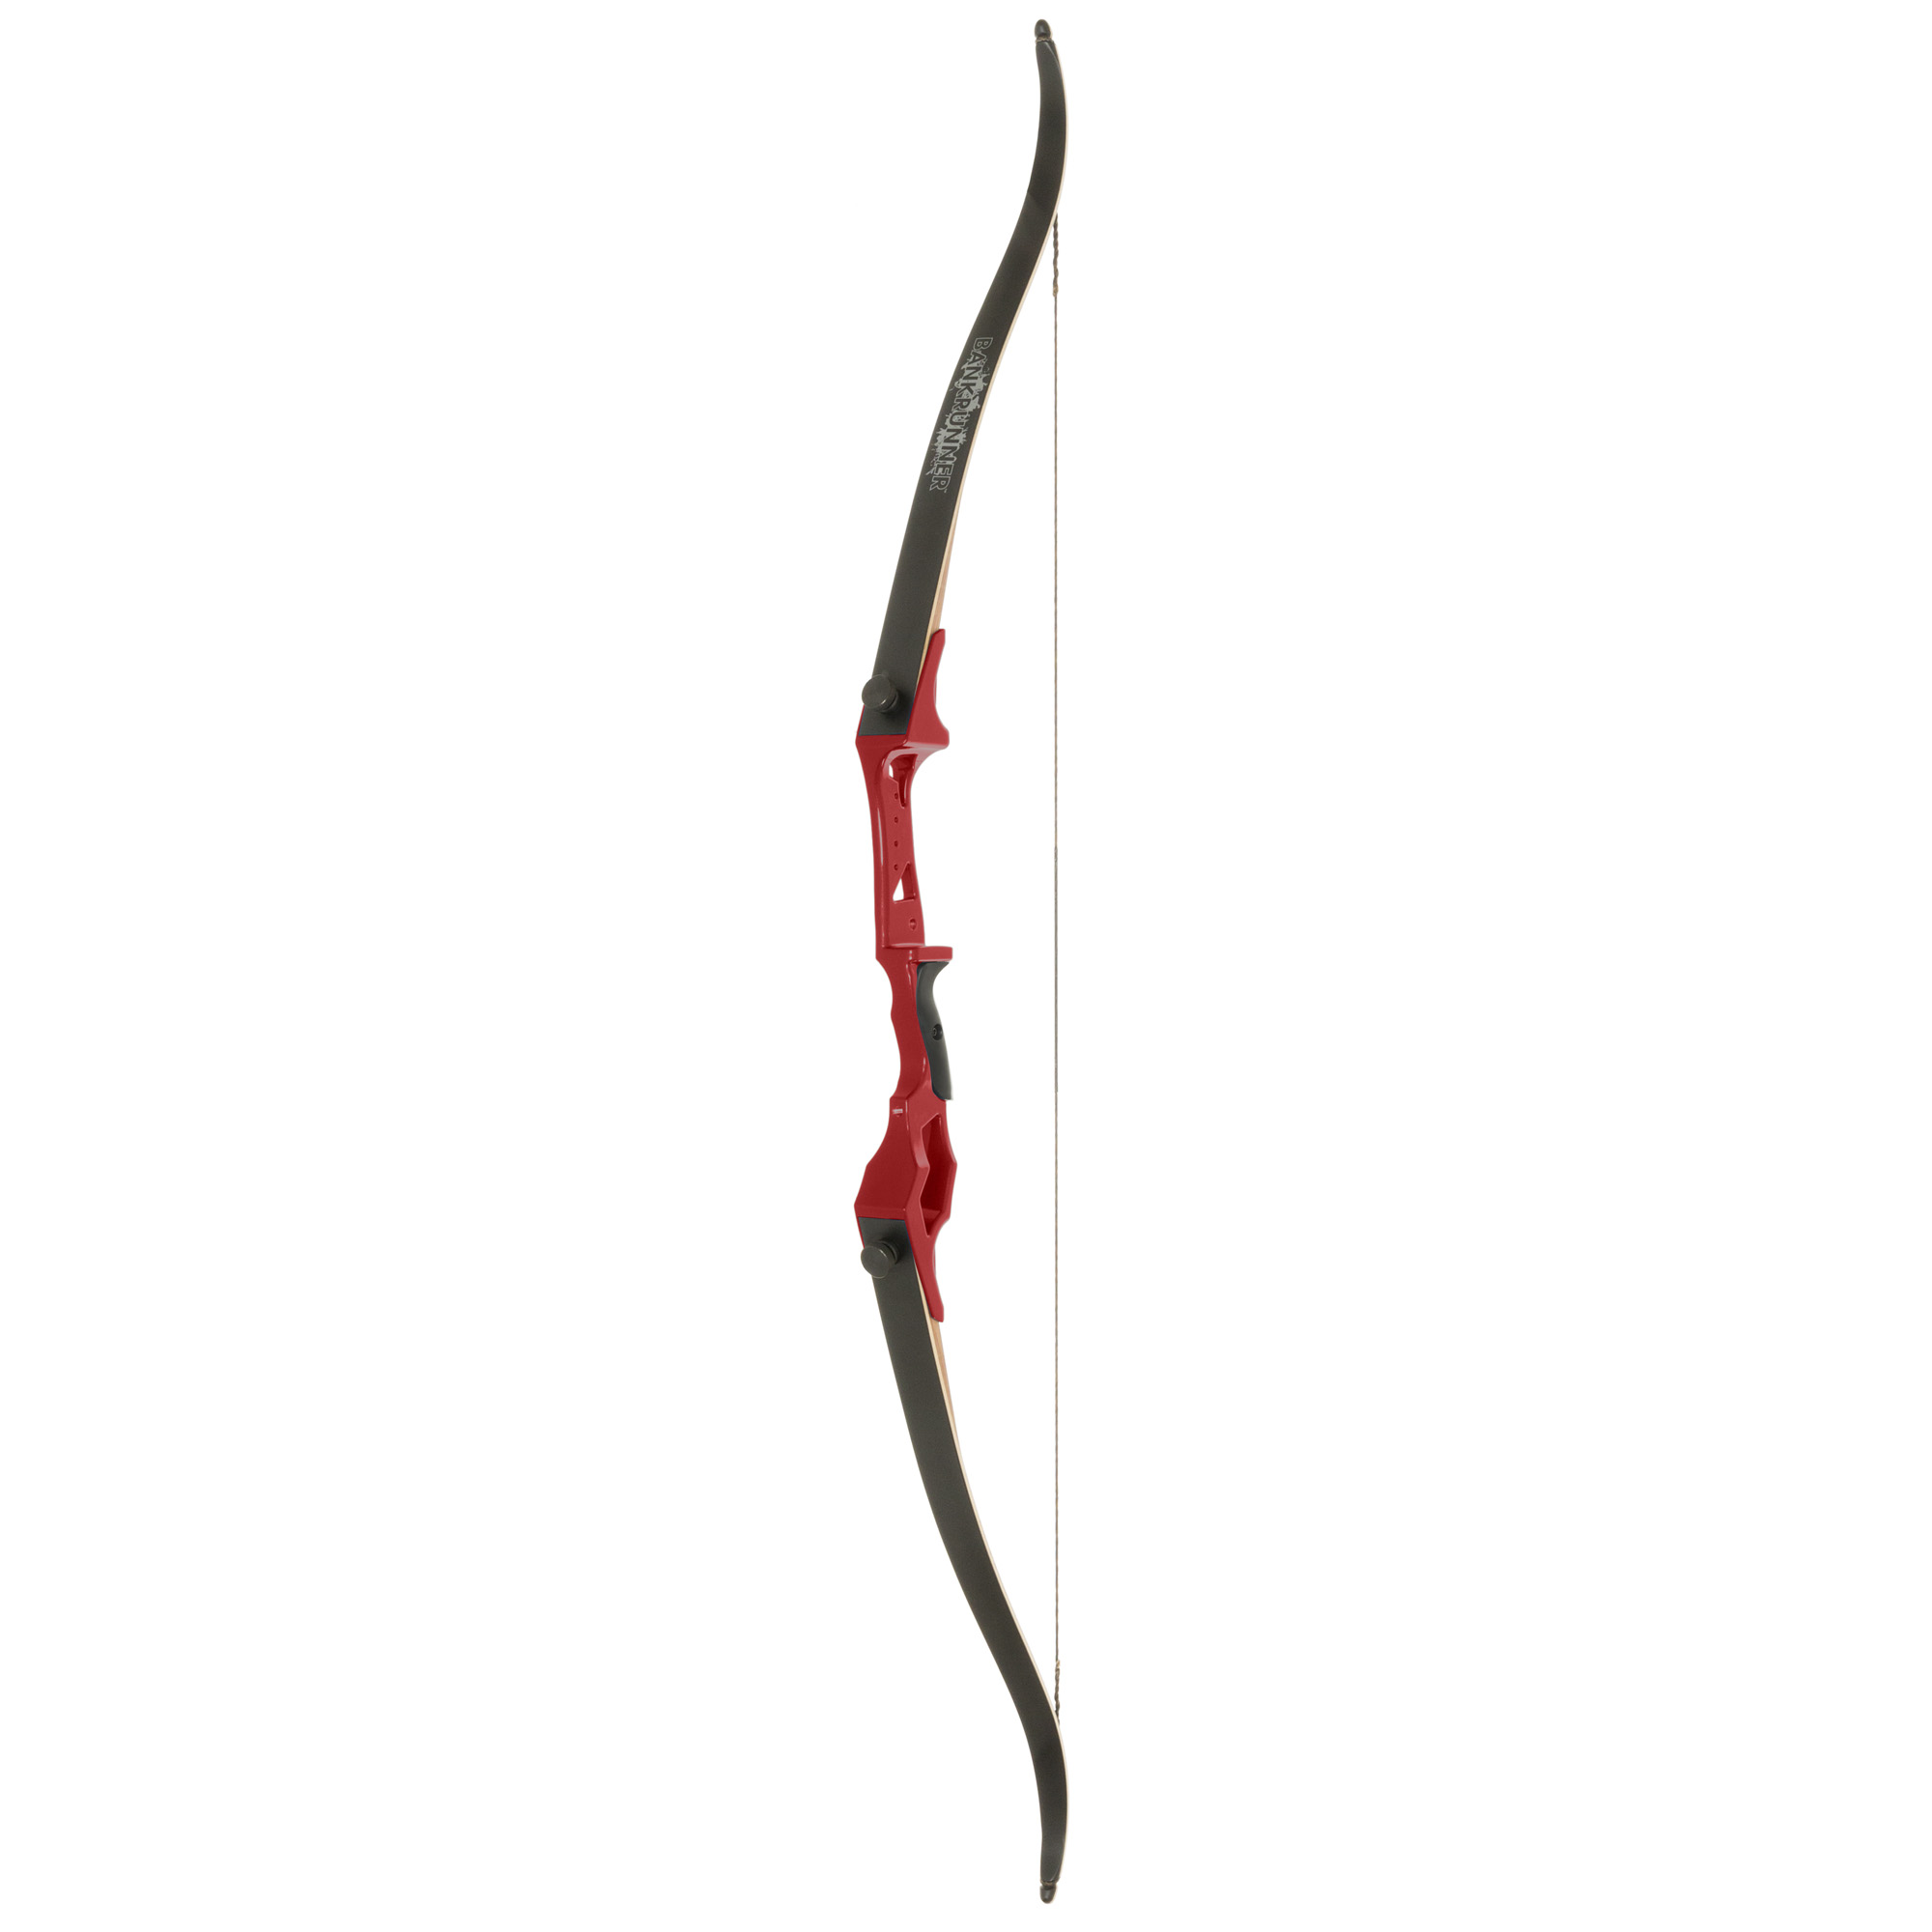 BankRunner Bowfishing Recurve Bow, Color Options